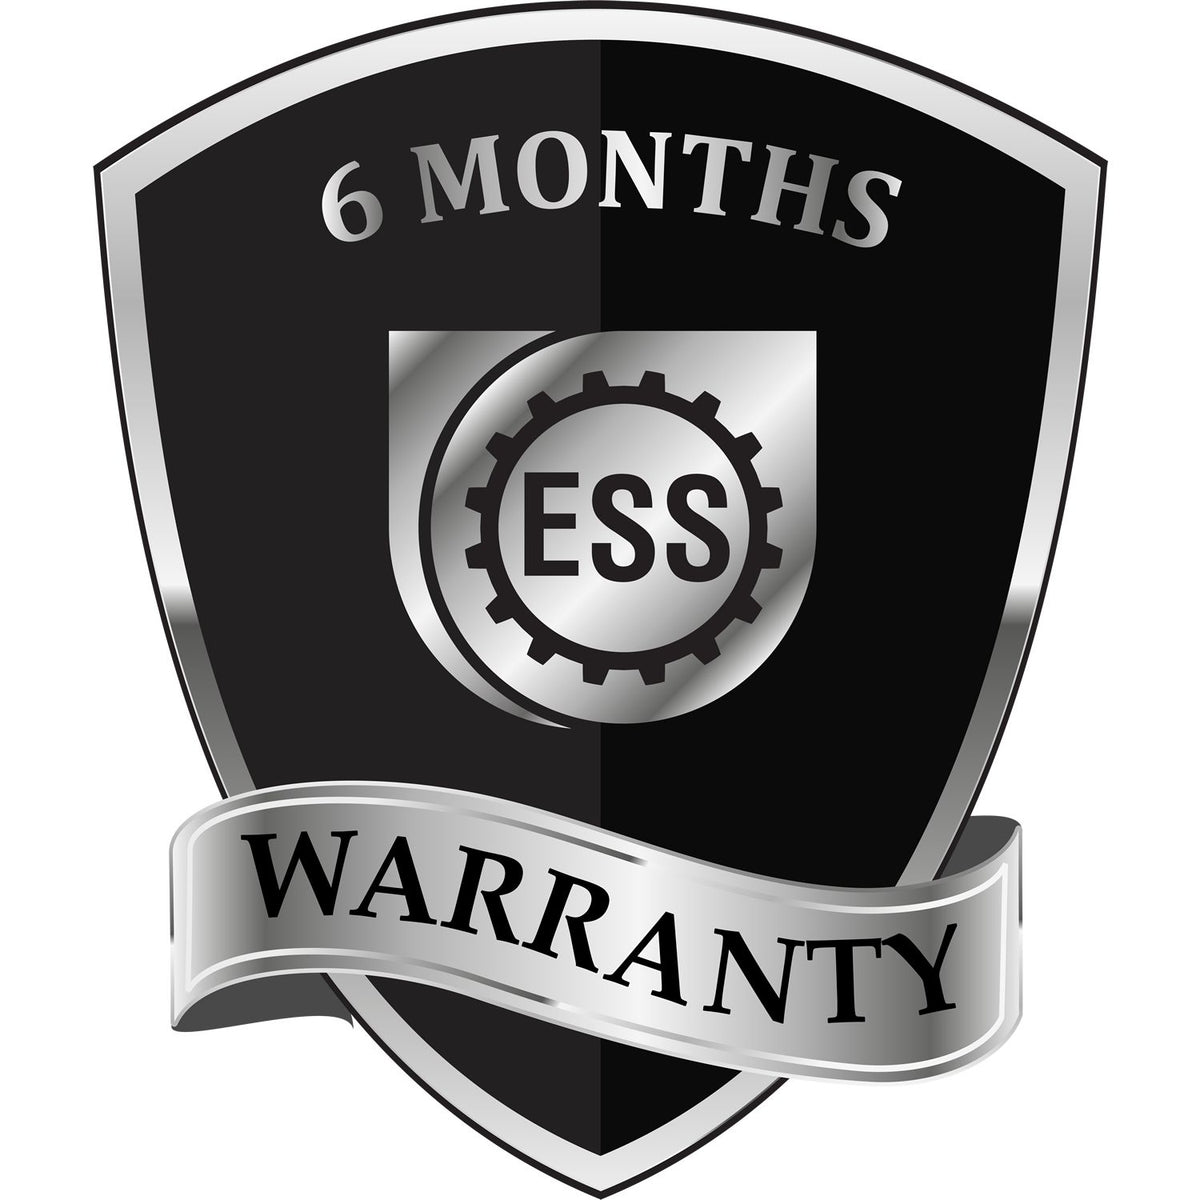 A badge or emblem showing a warranty icon for the Self-Inking Rectangular Illinois Notary Stamp